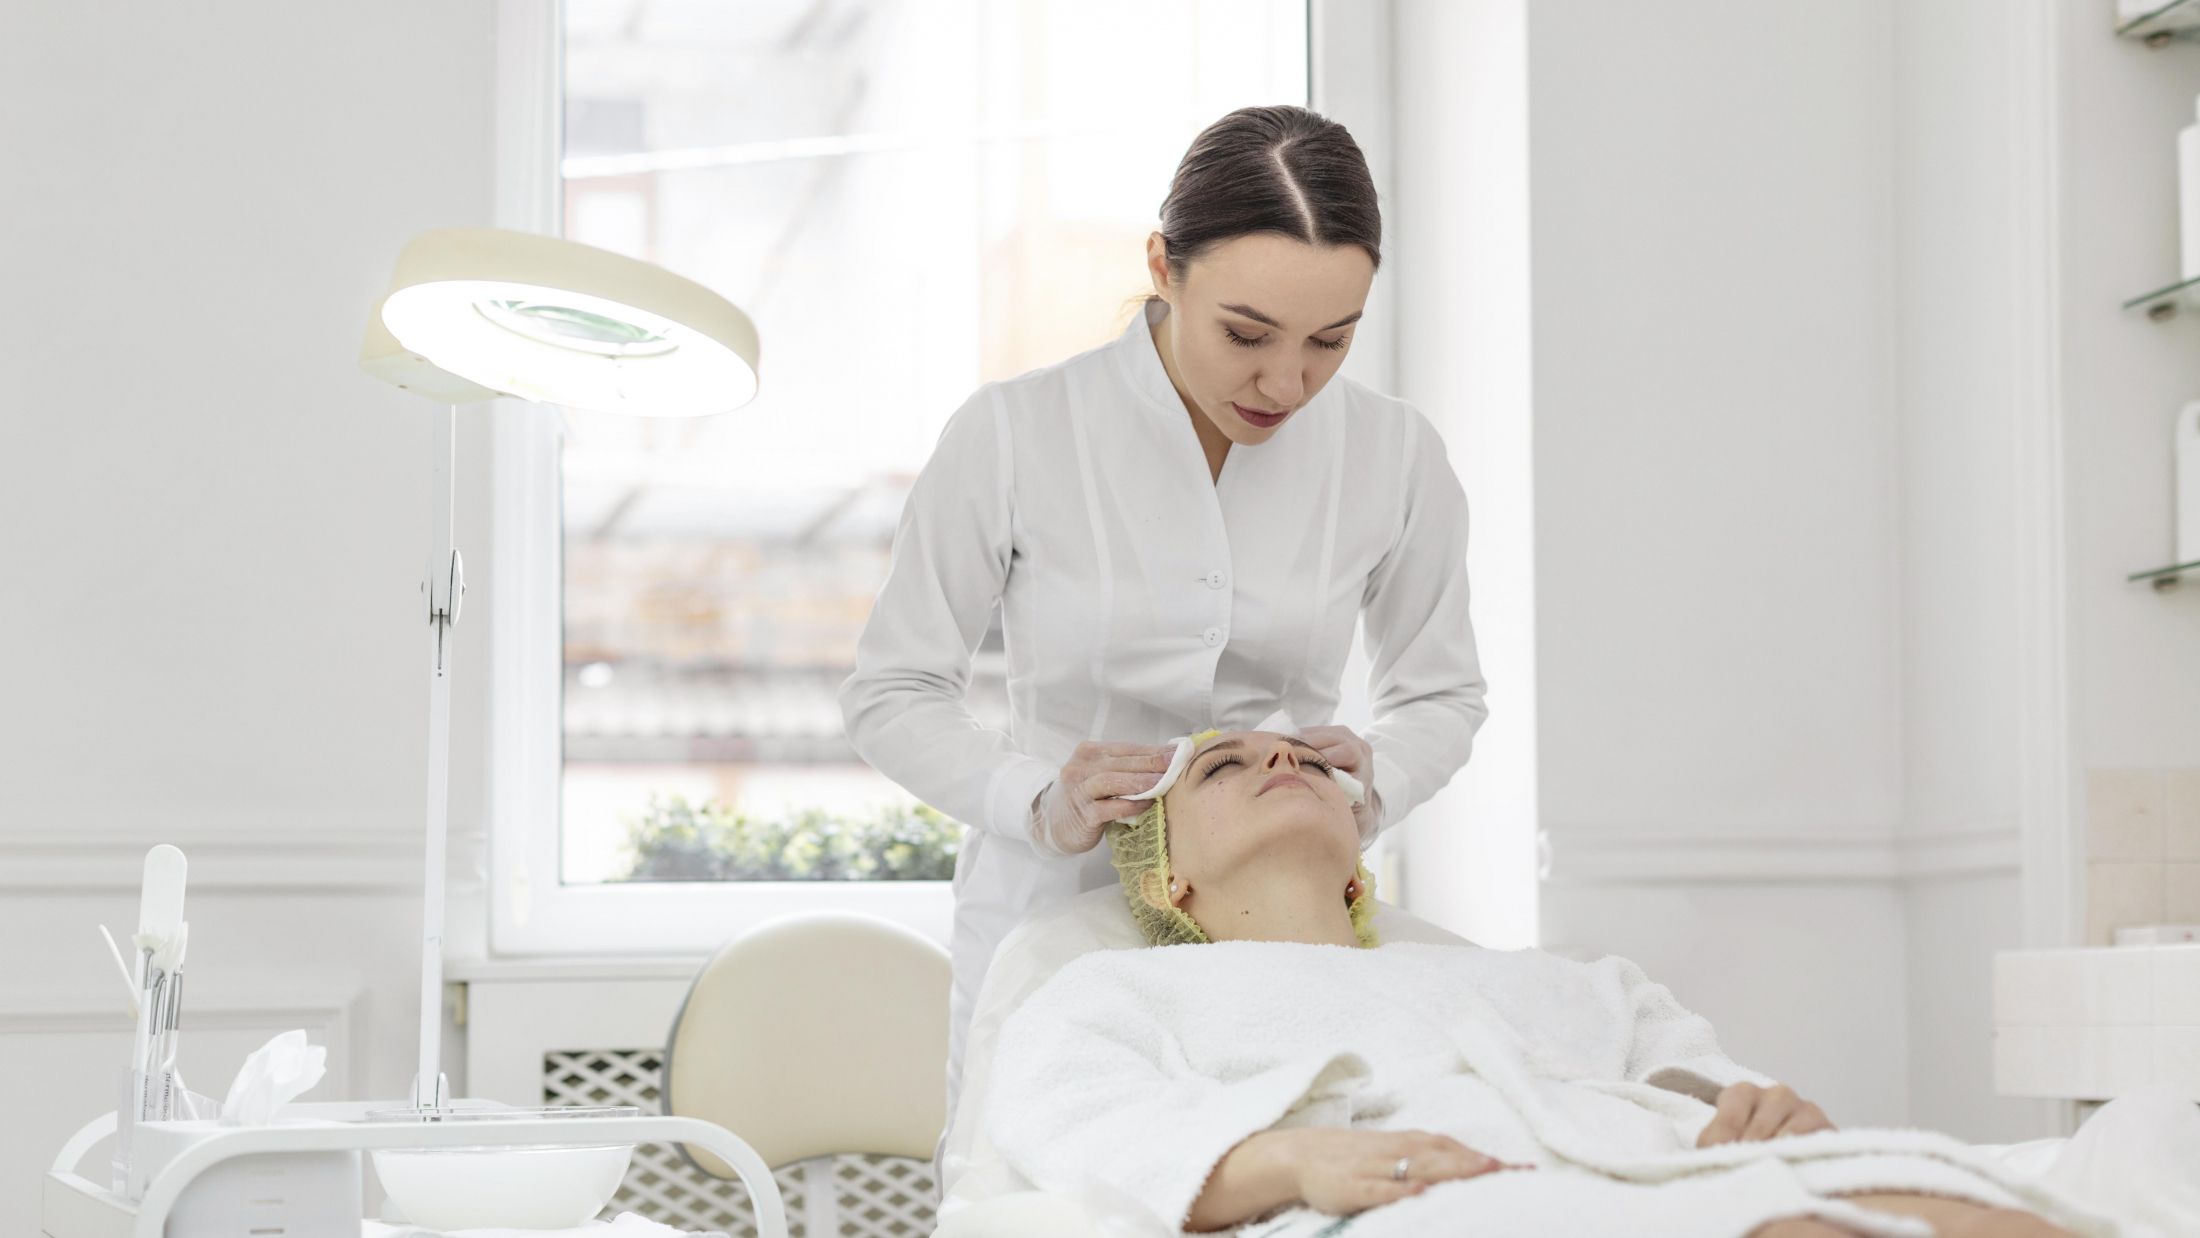 woman-at-beauty-clinic-for-face-treatment.jpg